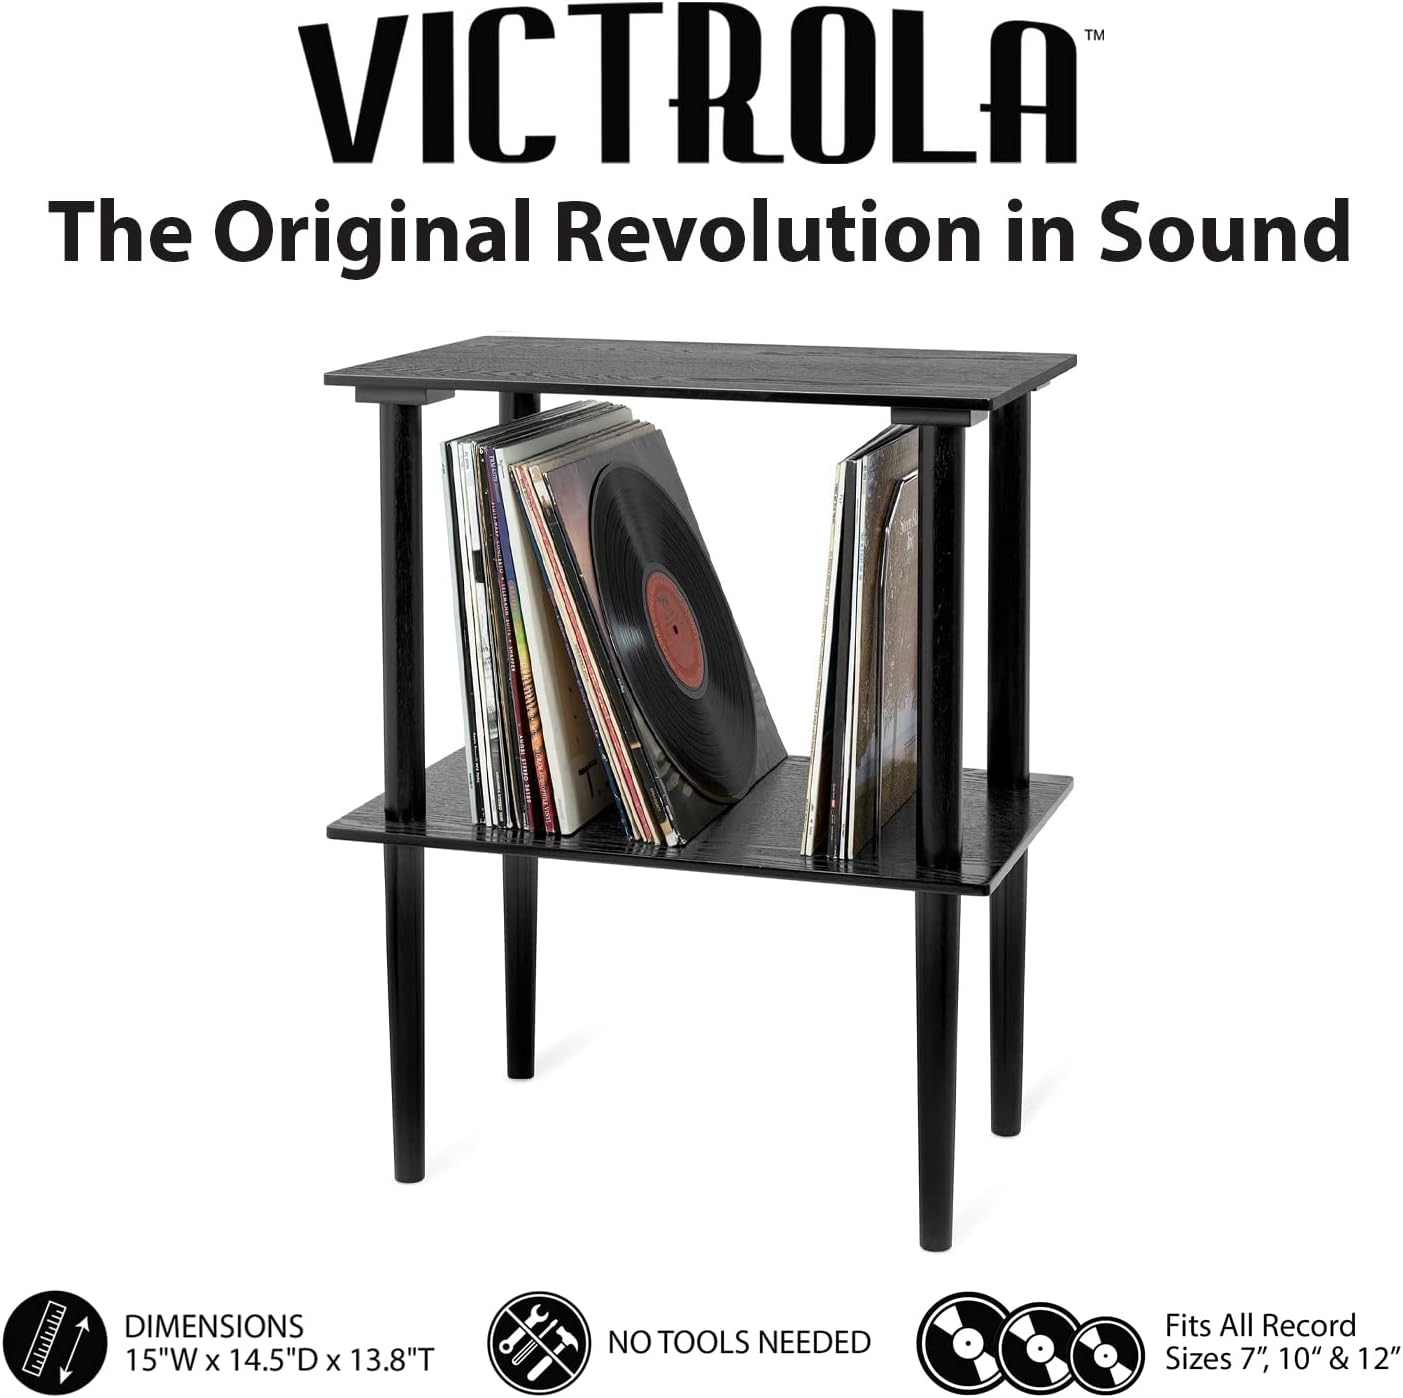 Victrola Nostalgic 6-in-1 Bluetooth Report Player & Multimedia Center with Built-in Speakers - 3-Speed Turntable, CD & Cassette Player, FM Radio | Wireless Music Streaming | Mahogany